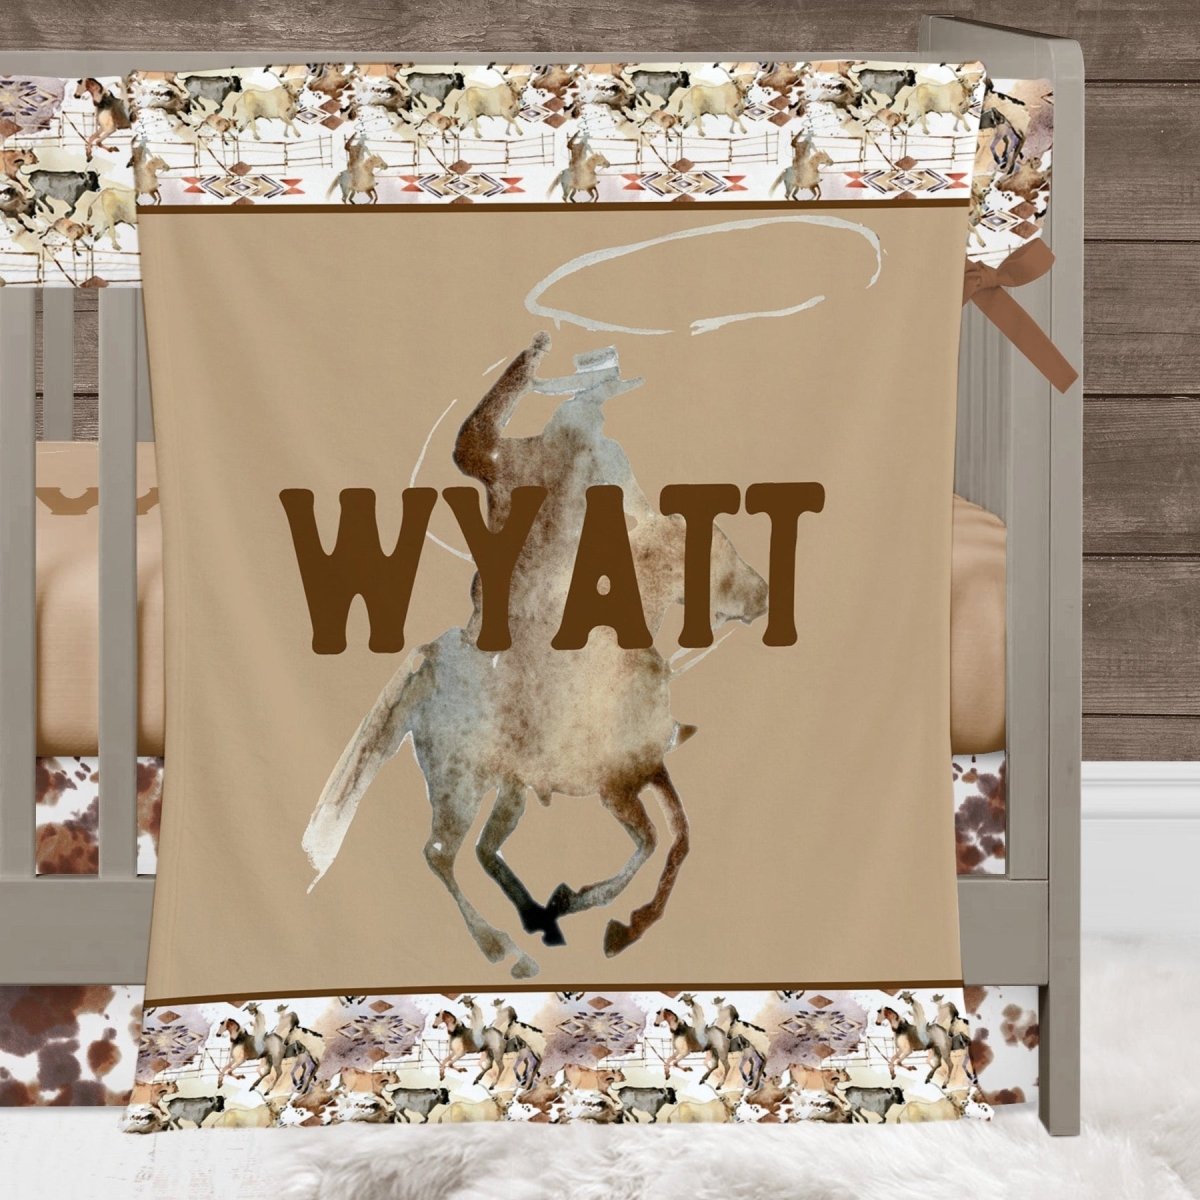 Wild West Cowboy Personalized Minky Blanket - gender_boy, Personalized_Yes, text